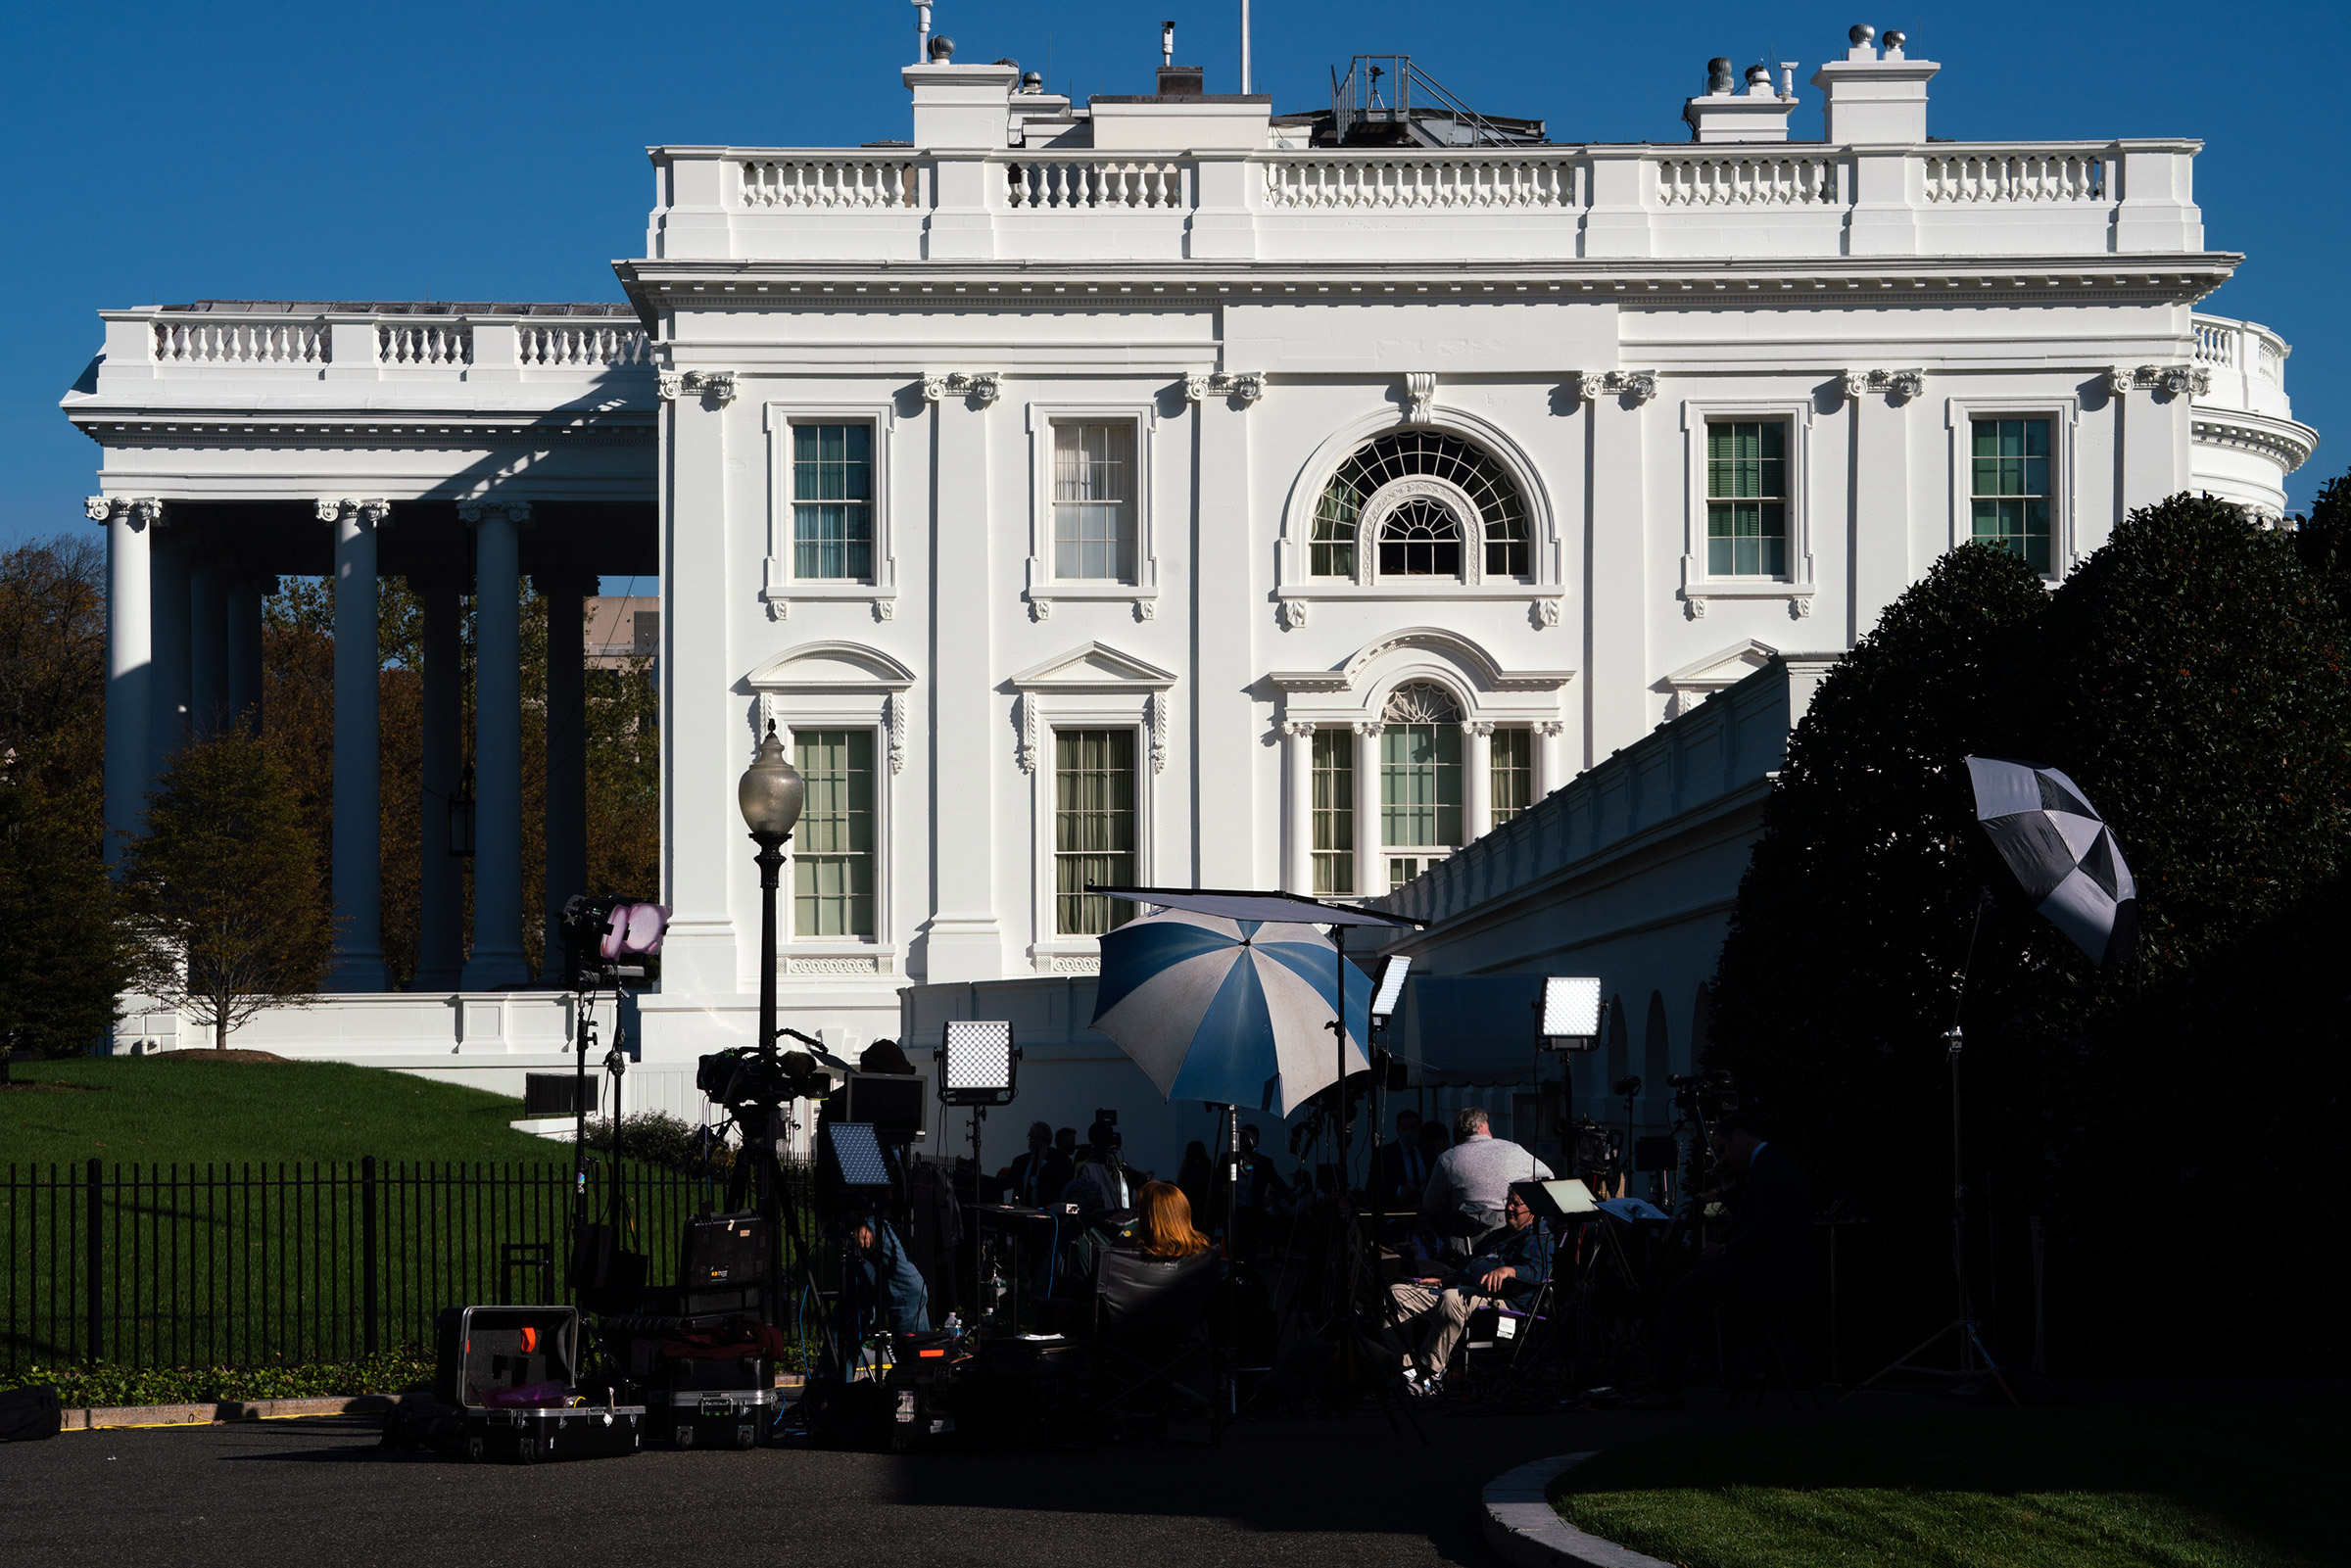 2020. Washington DC. USA. The White House grounds, four days after the 2020 presidential election has not determined a definitive winner.